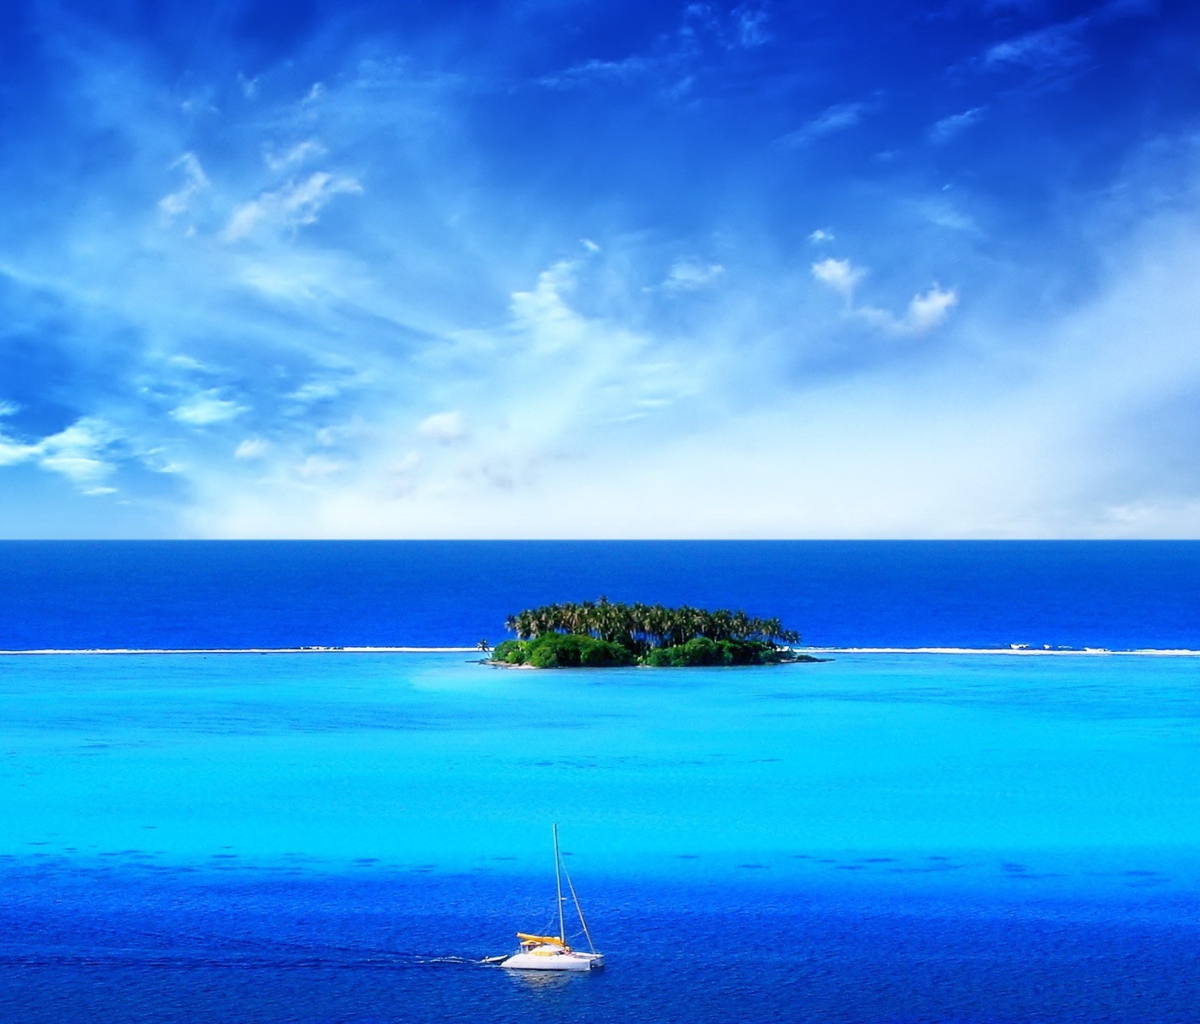 Green Island In Middle Of Blue Ocean And White Boat screenshot #1 1200x1024